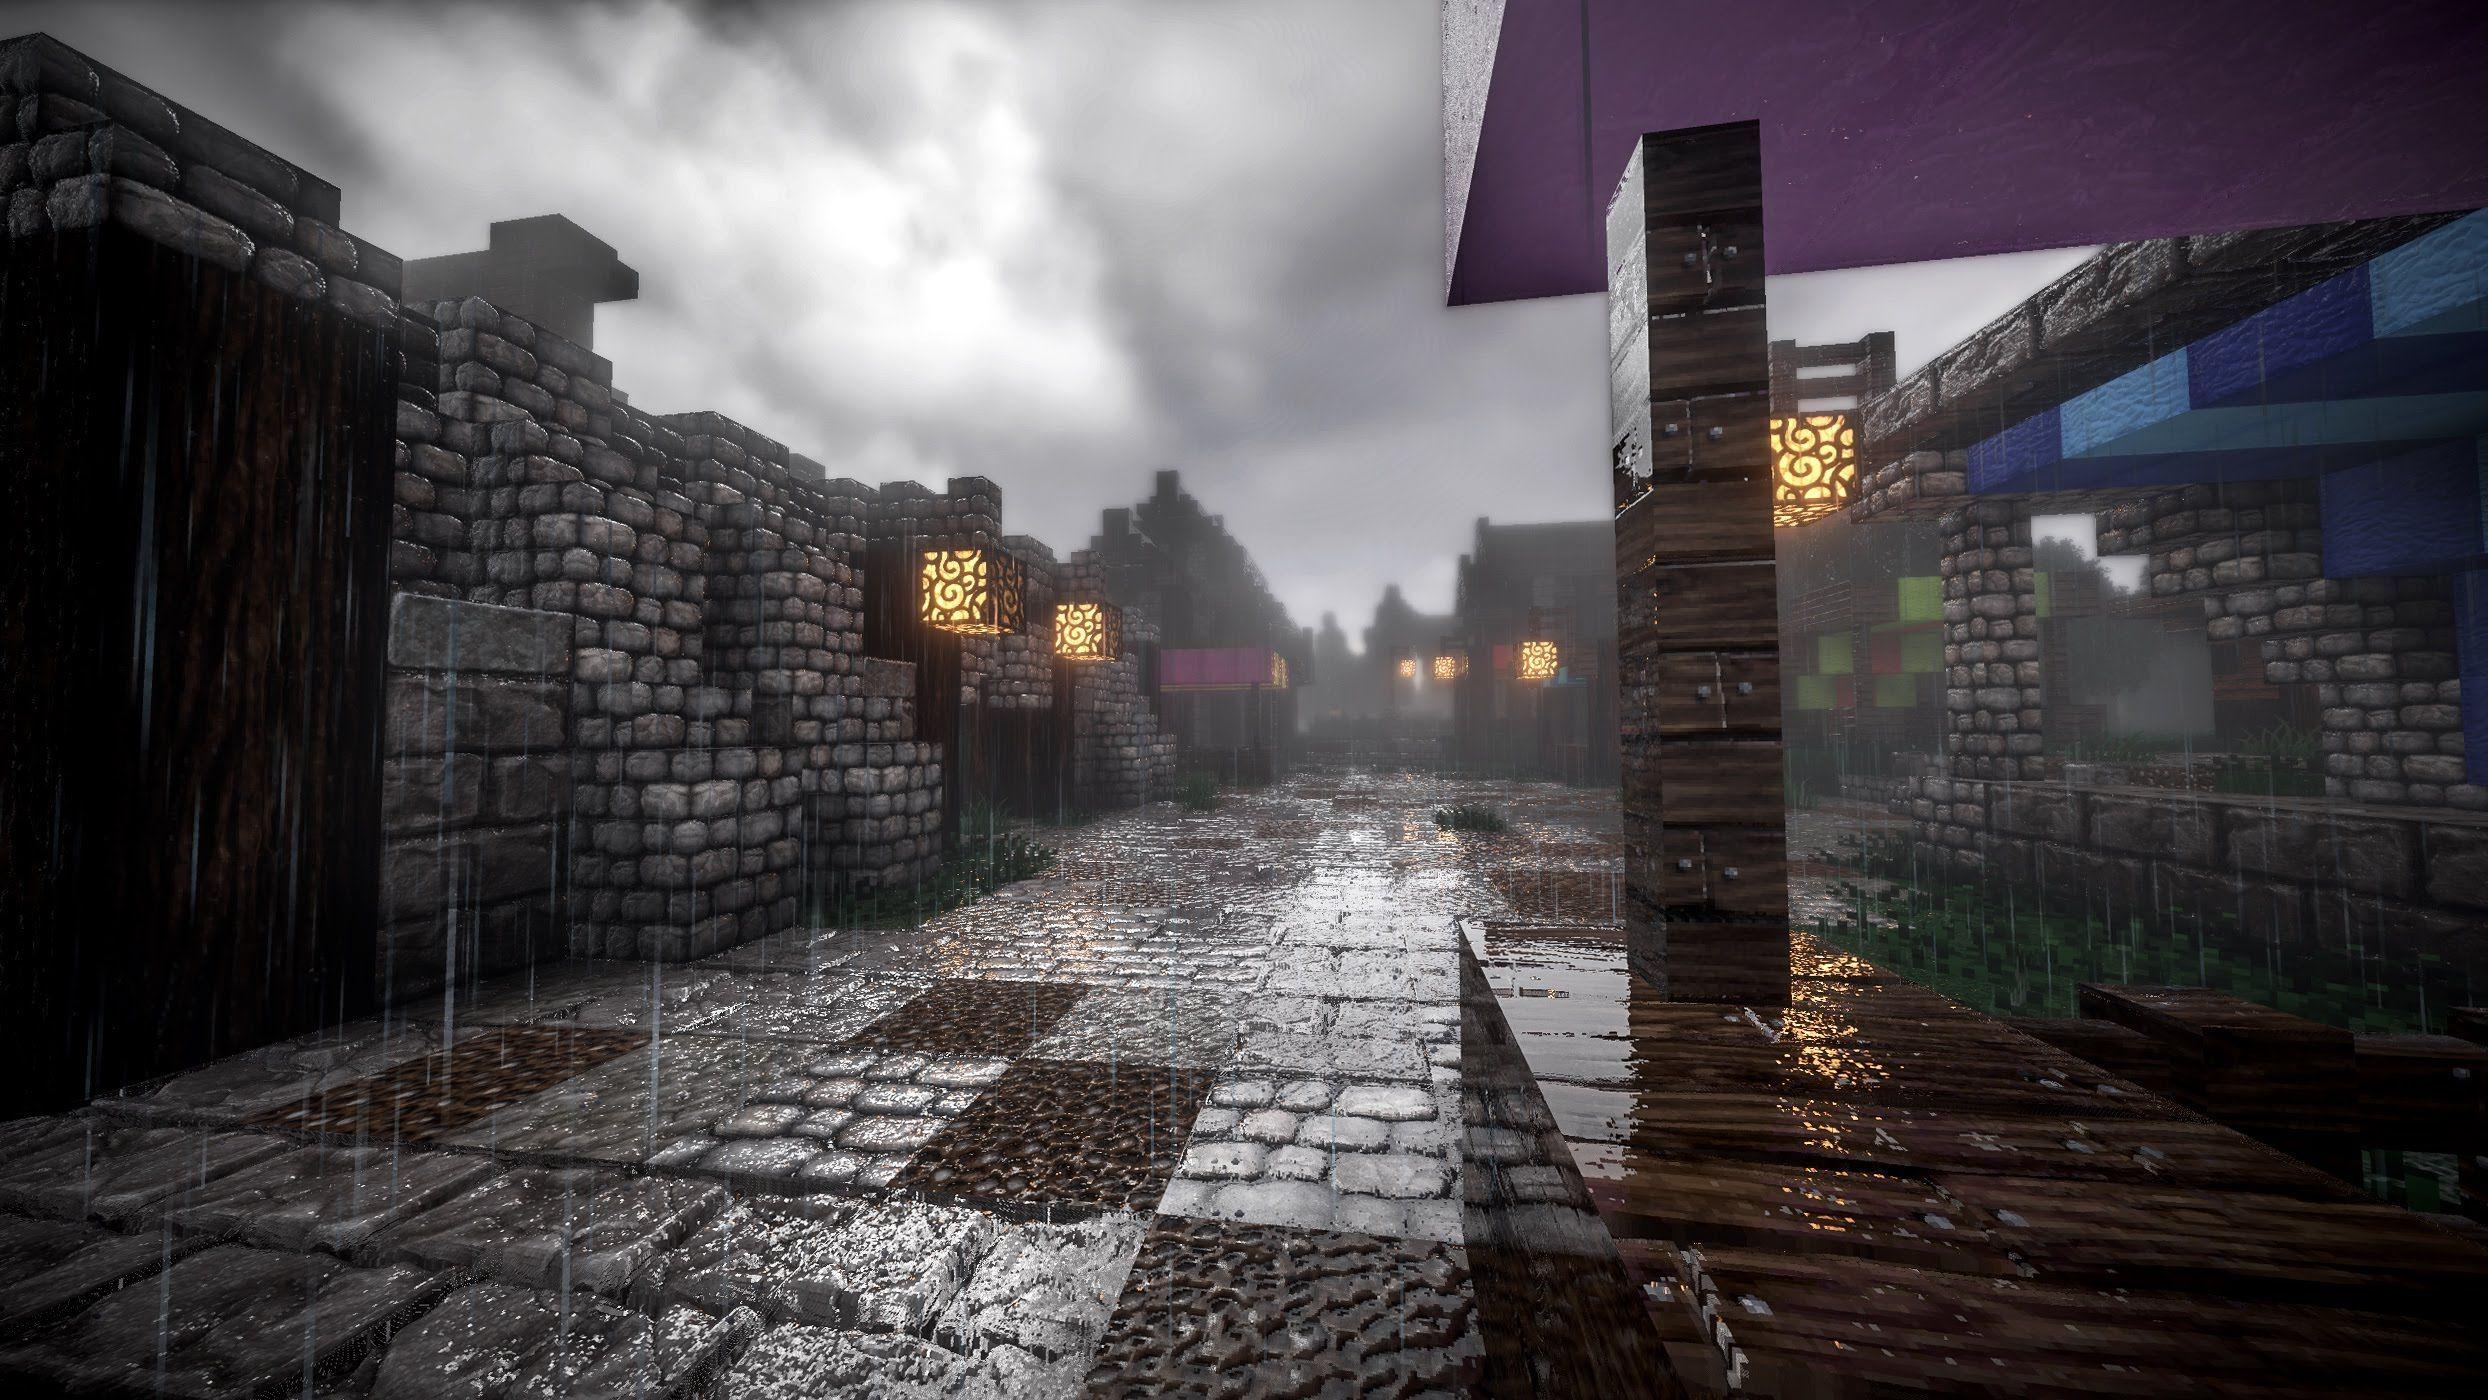 minecraft bedrock ray tracing texture pack download